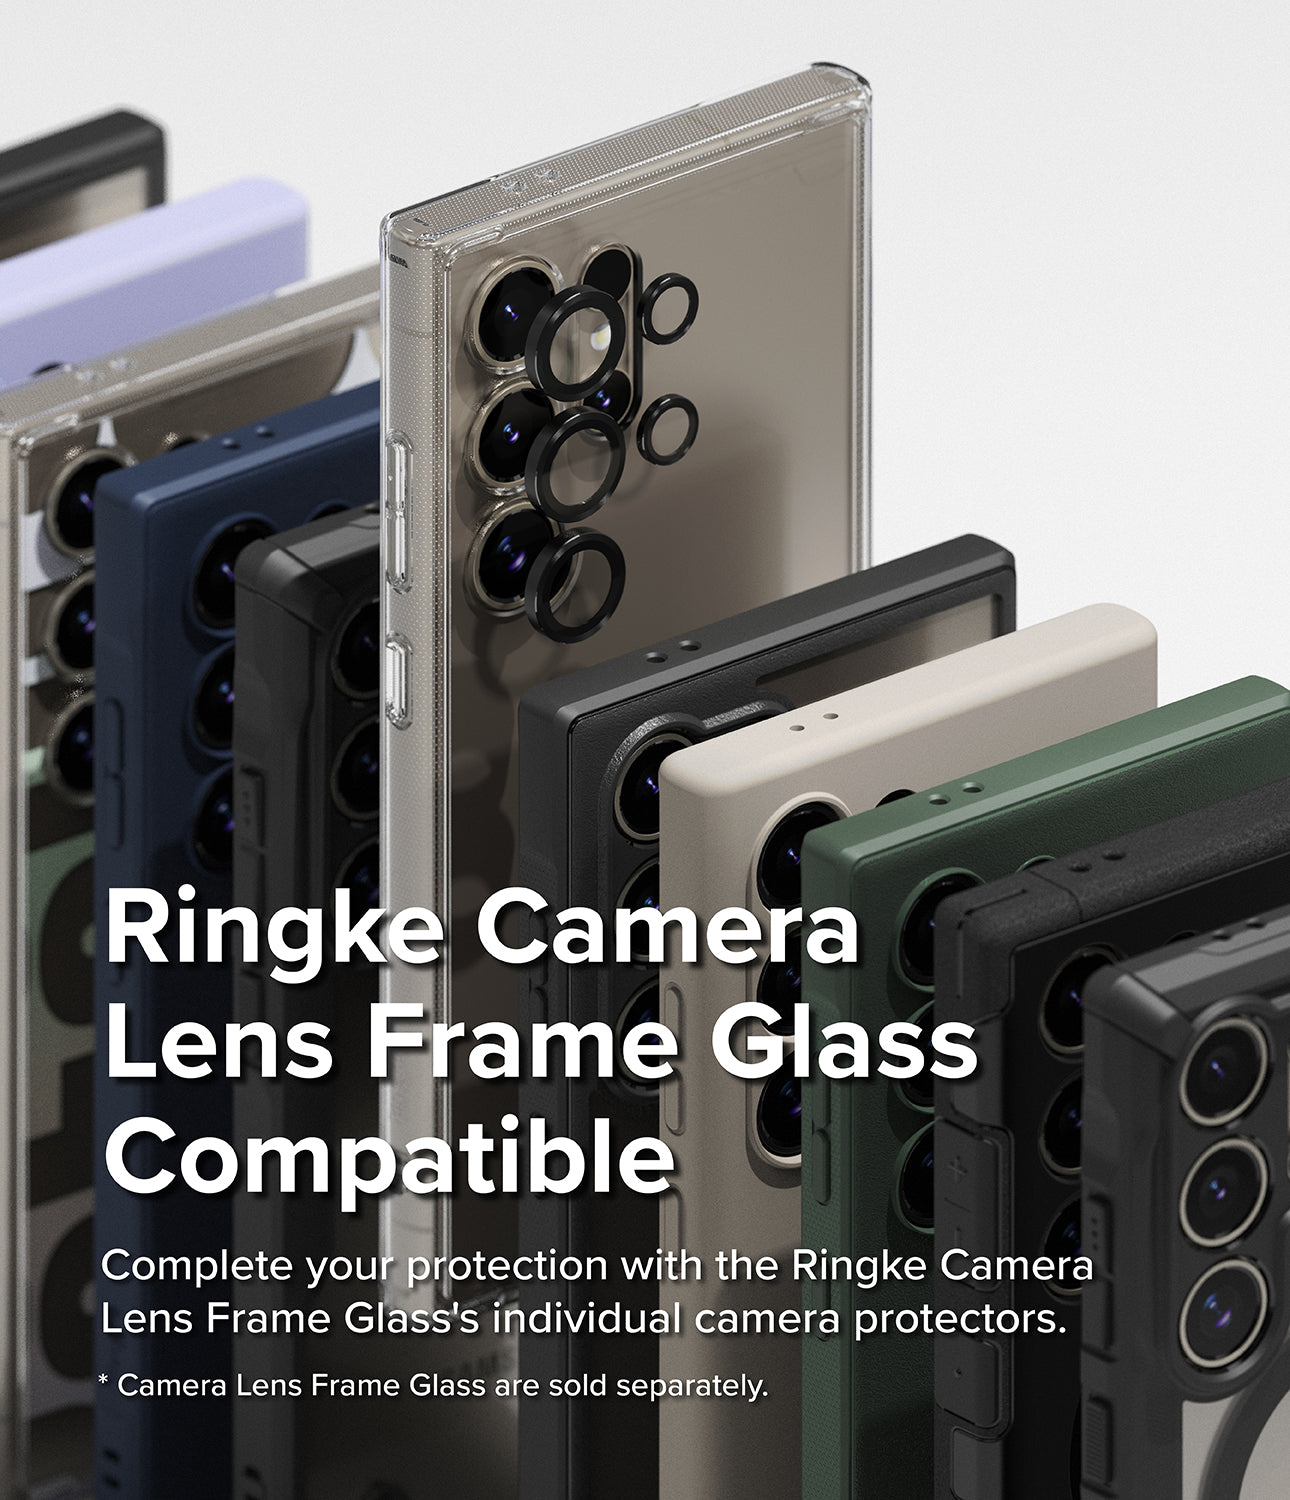 Galaxy S24 Ultra Case | Fusion Card - Ringke Camera Lens Frame Glass Compatible. Complete your protection with the Ringke Camera Lens Frame Glass' individual camera protectors